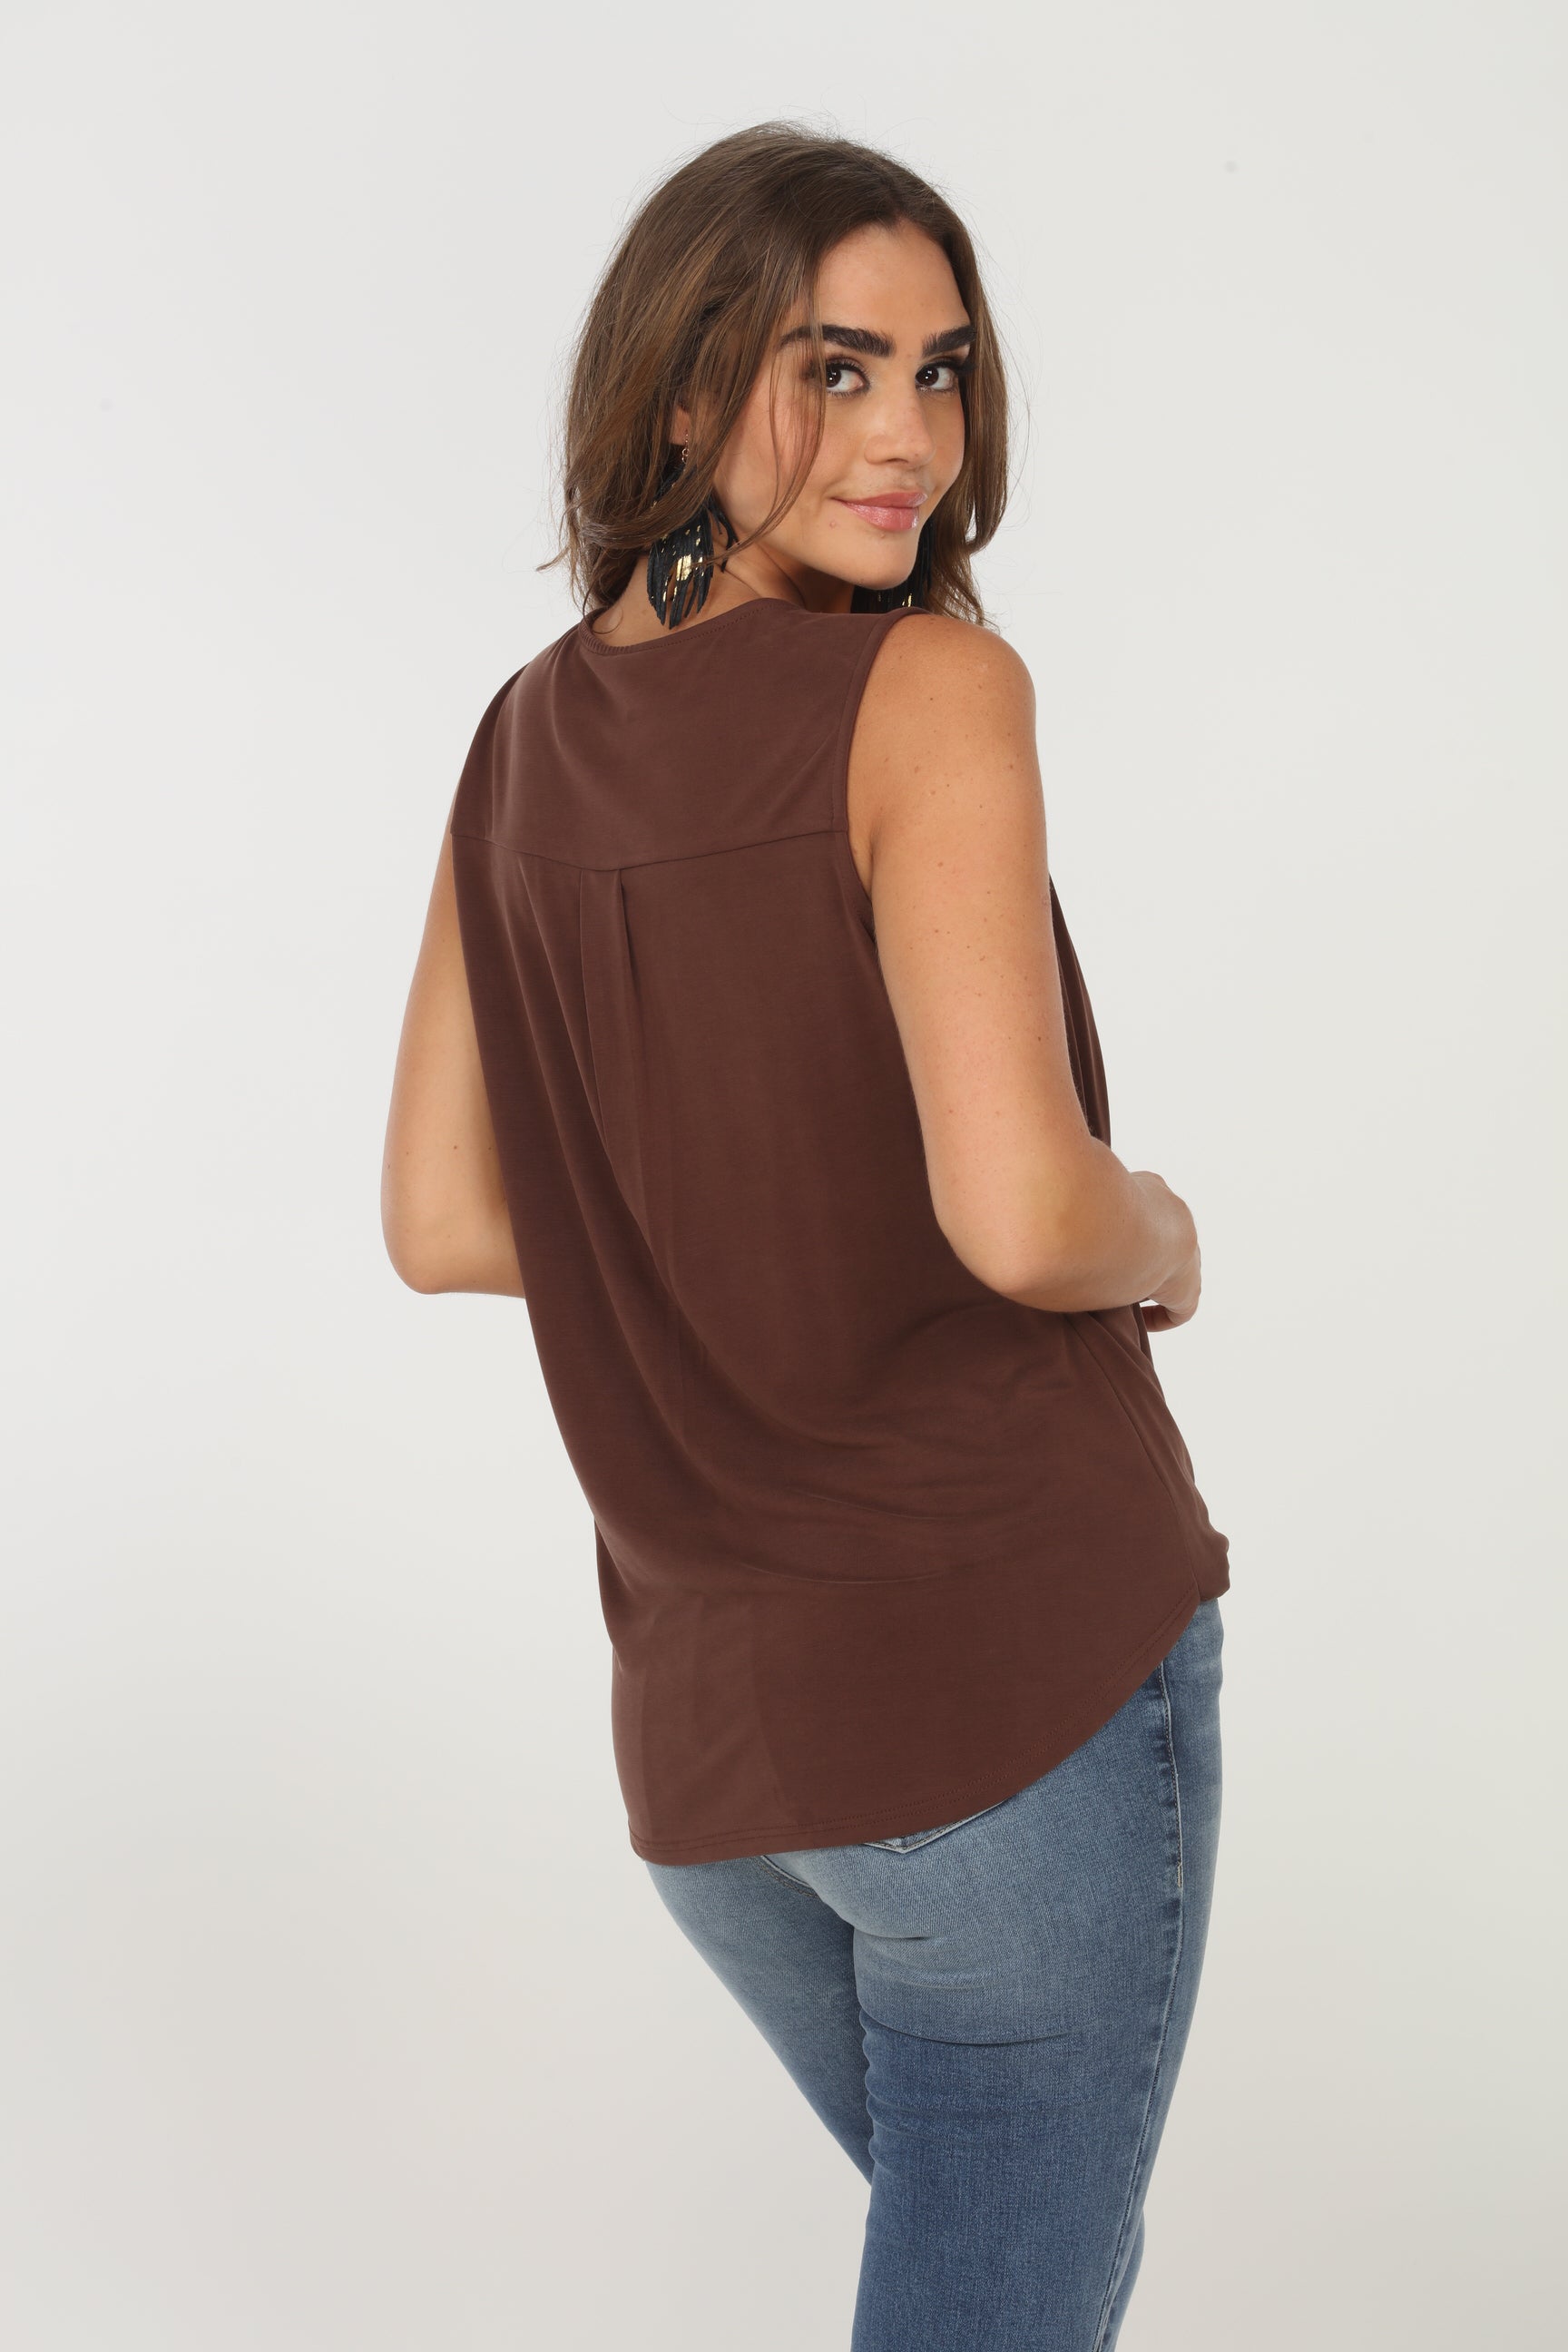 The Everyday Surplice Tank-Cocoa- BEST SELLER